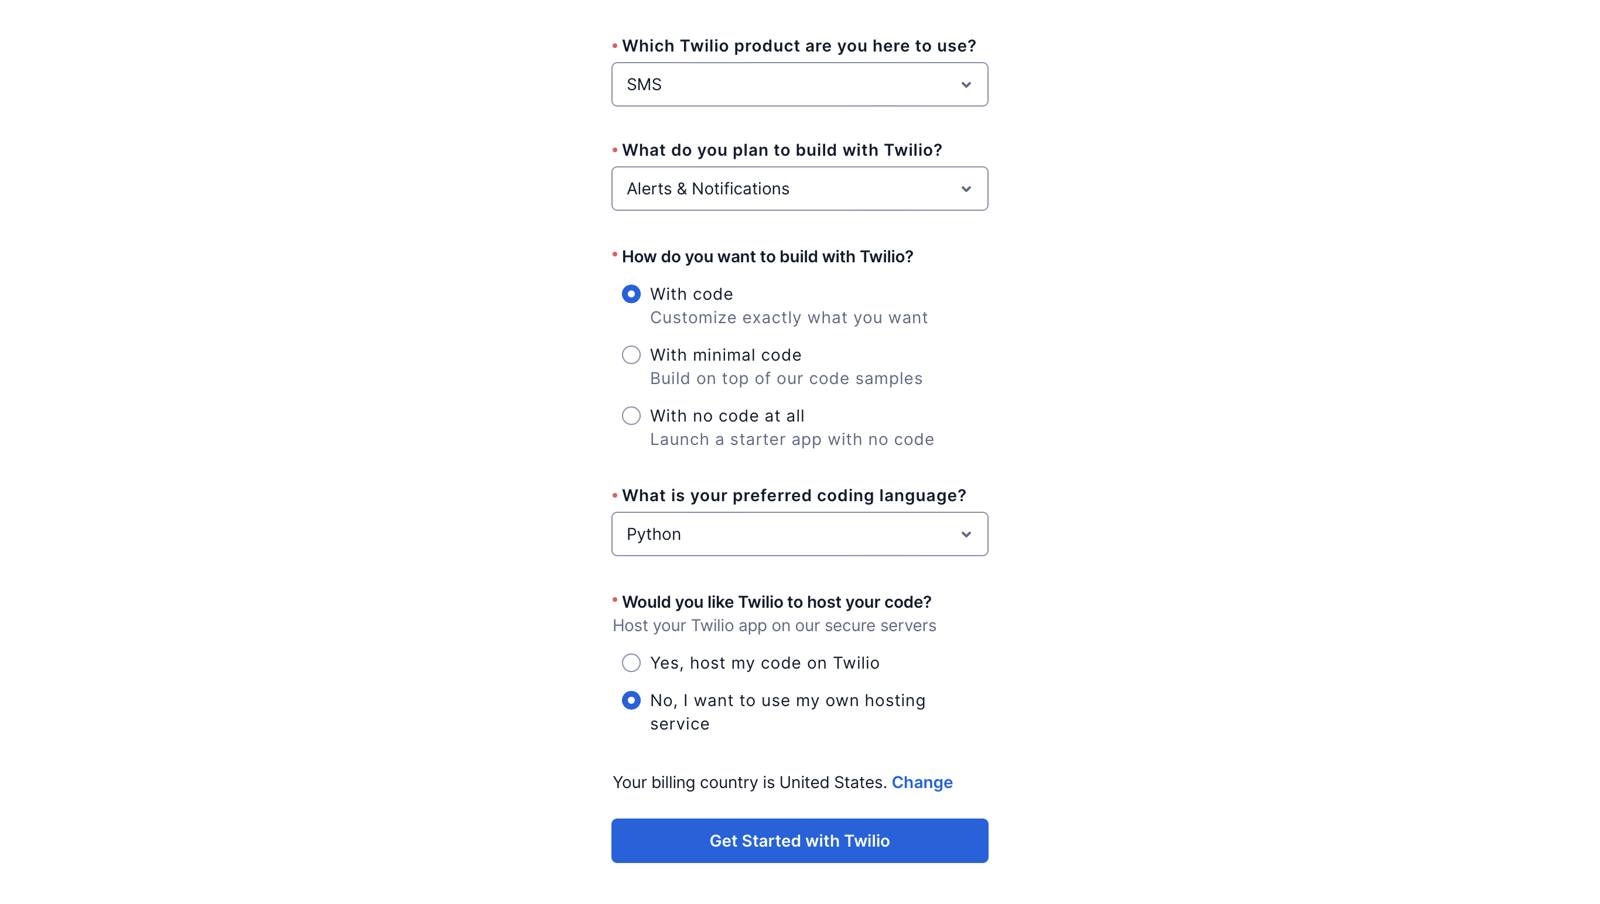 Twilio onboarding form - personalization questions